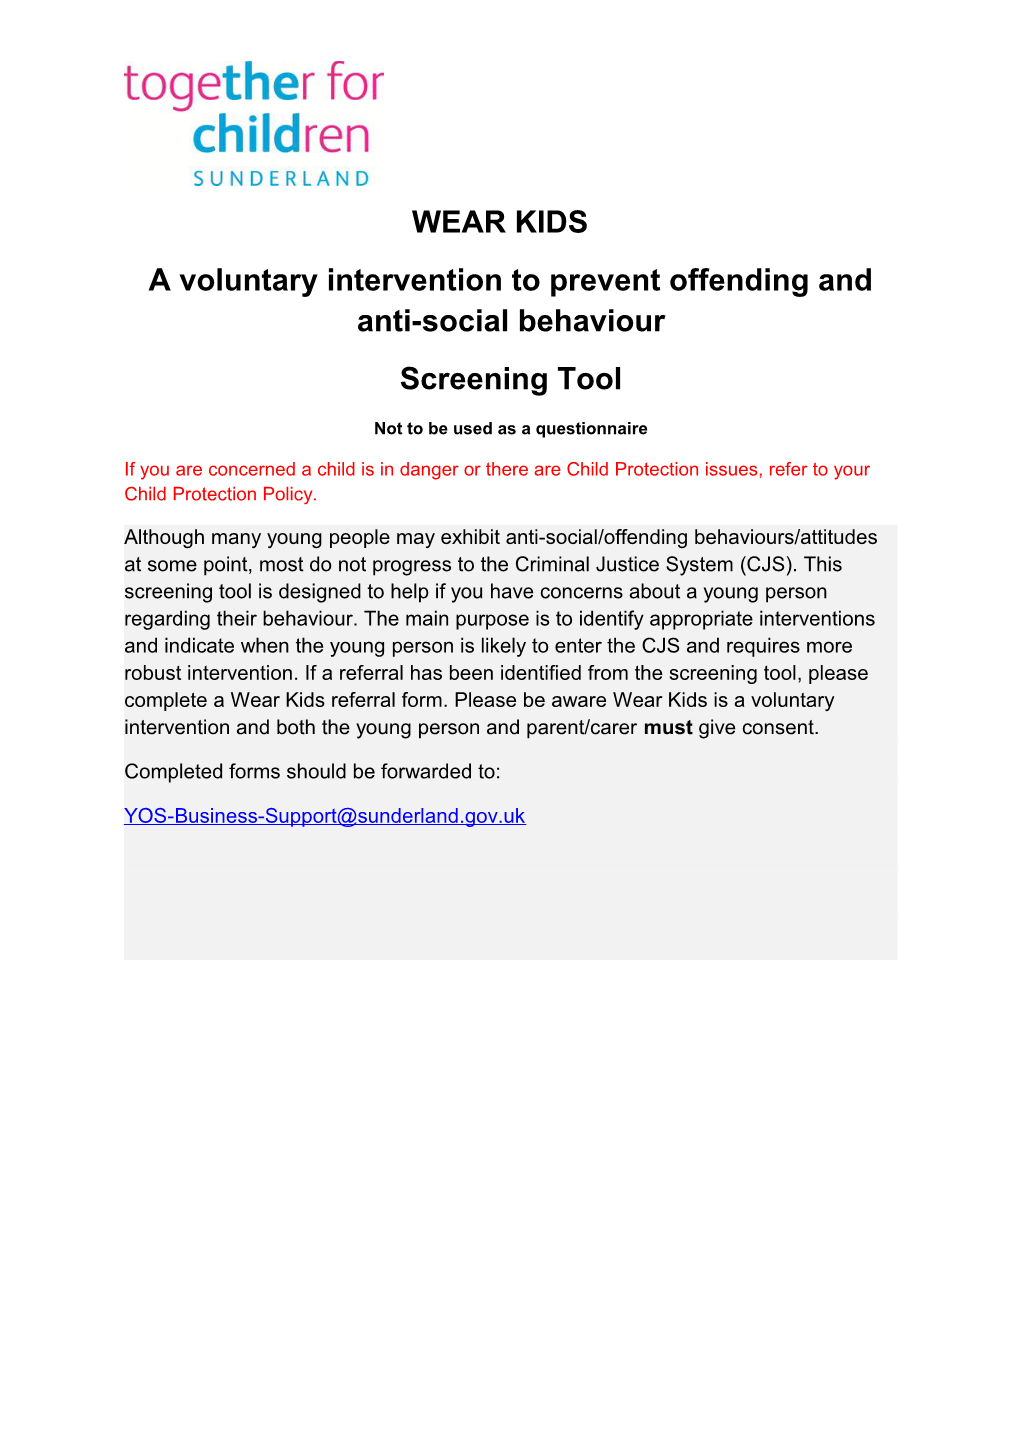 A Voluntary Intervention to Prevent Offending and Anti-Social Behaviour